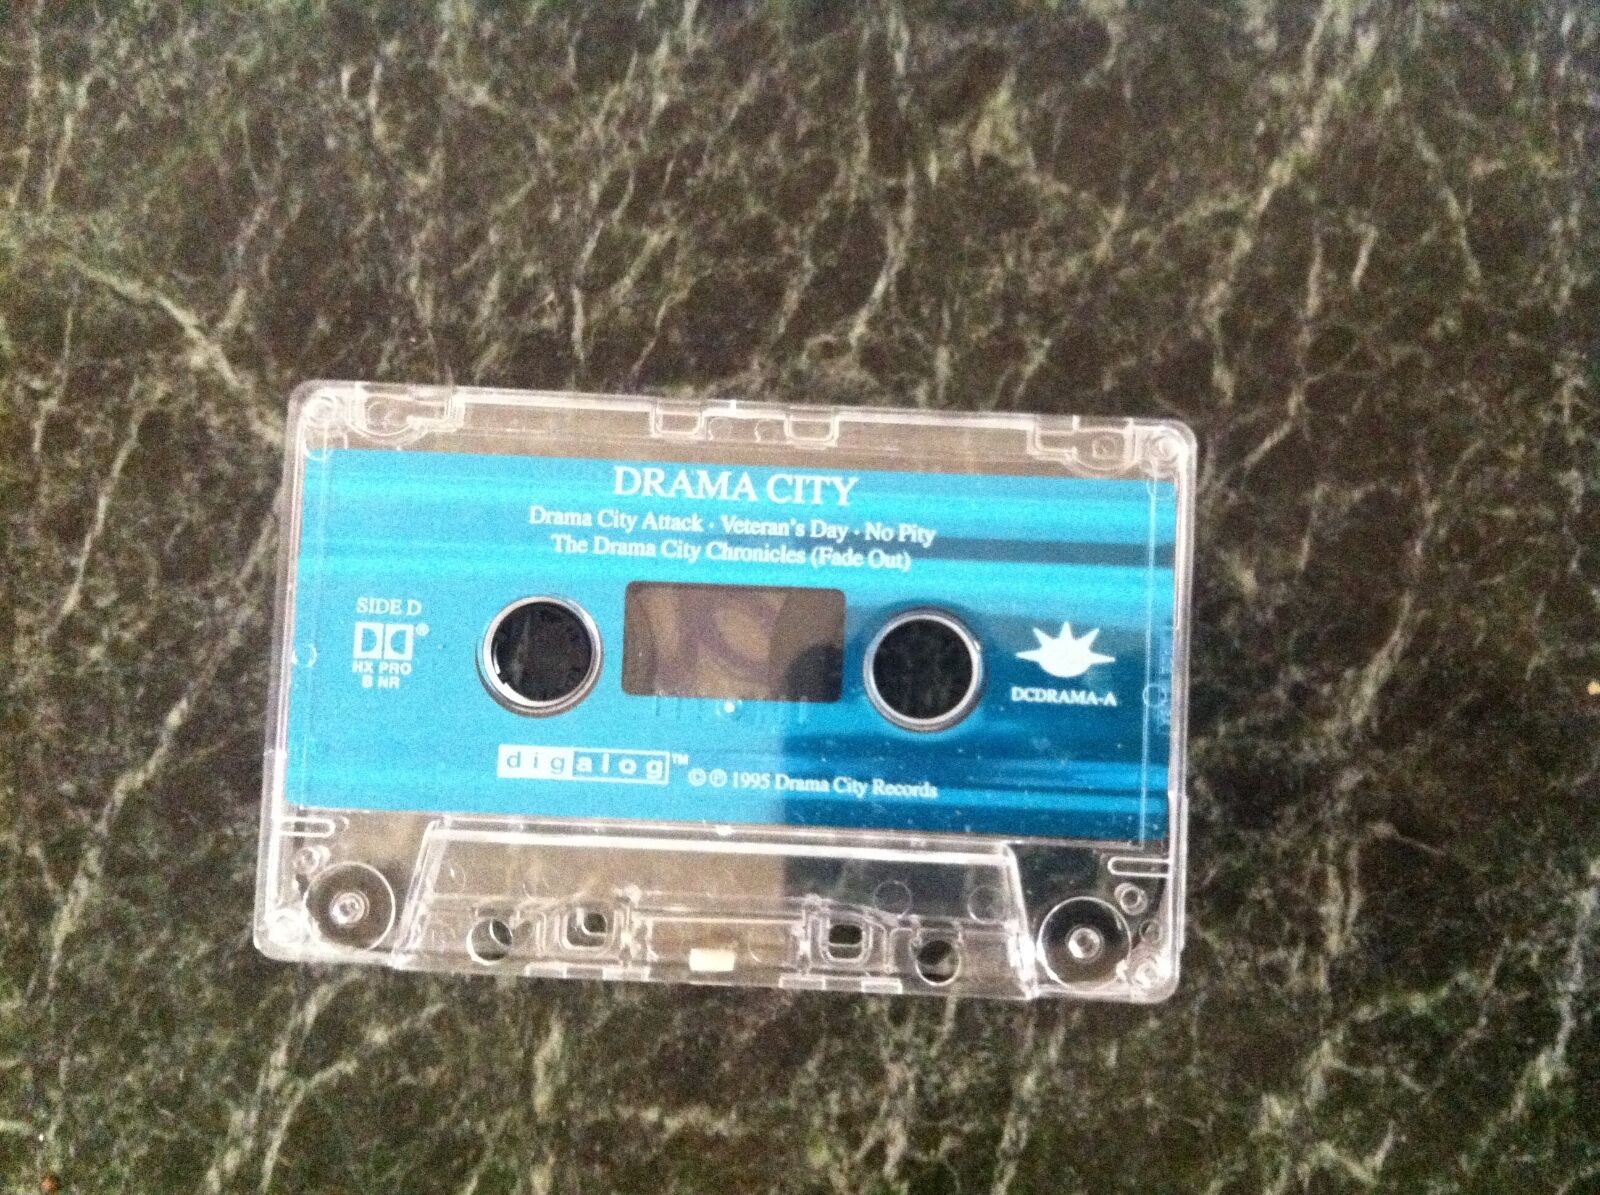 Drama city attack cassette  Plays great